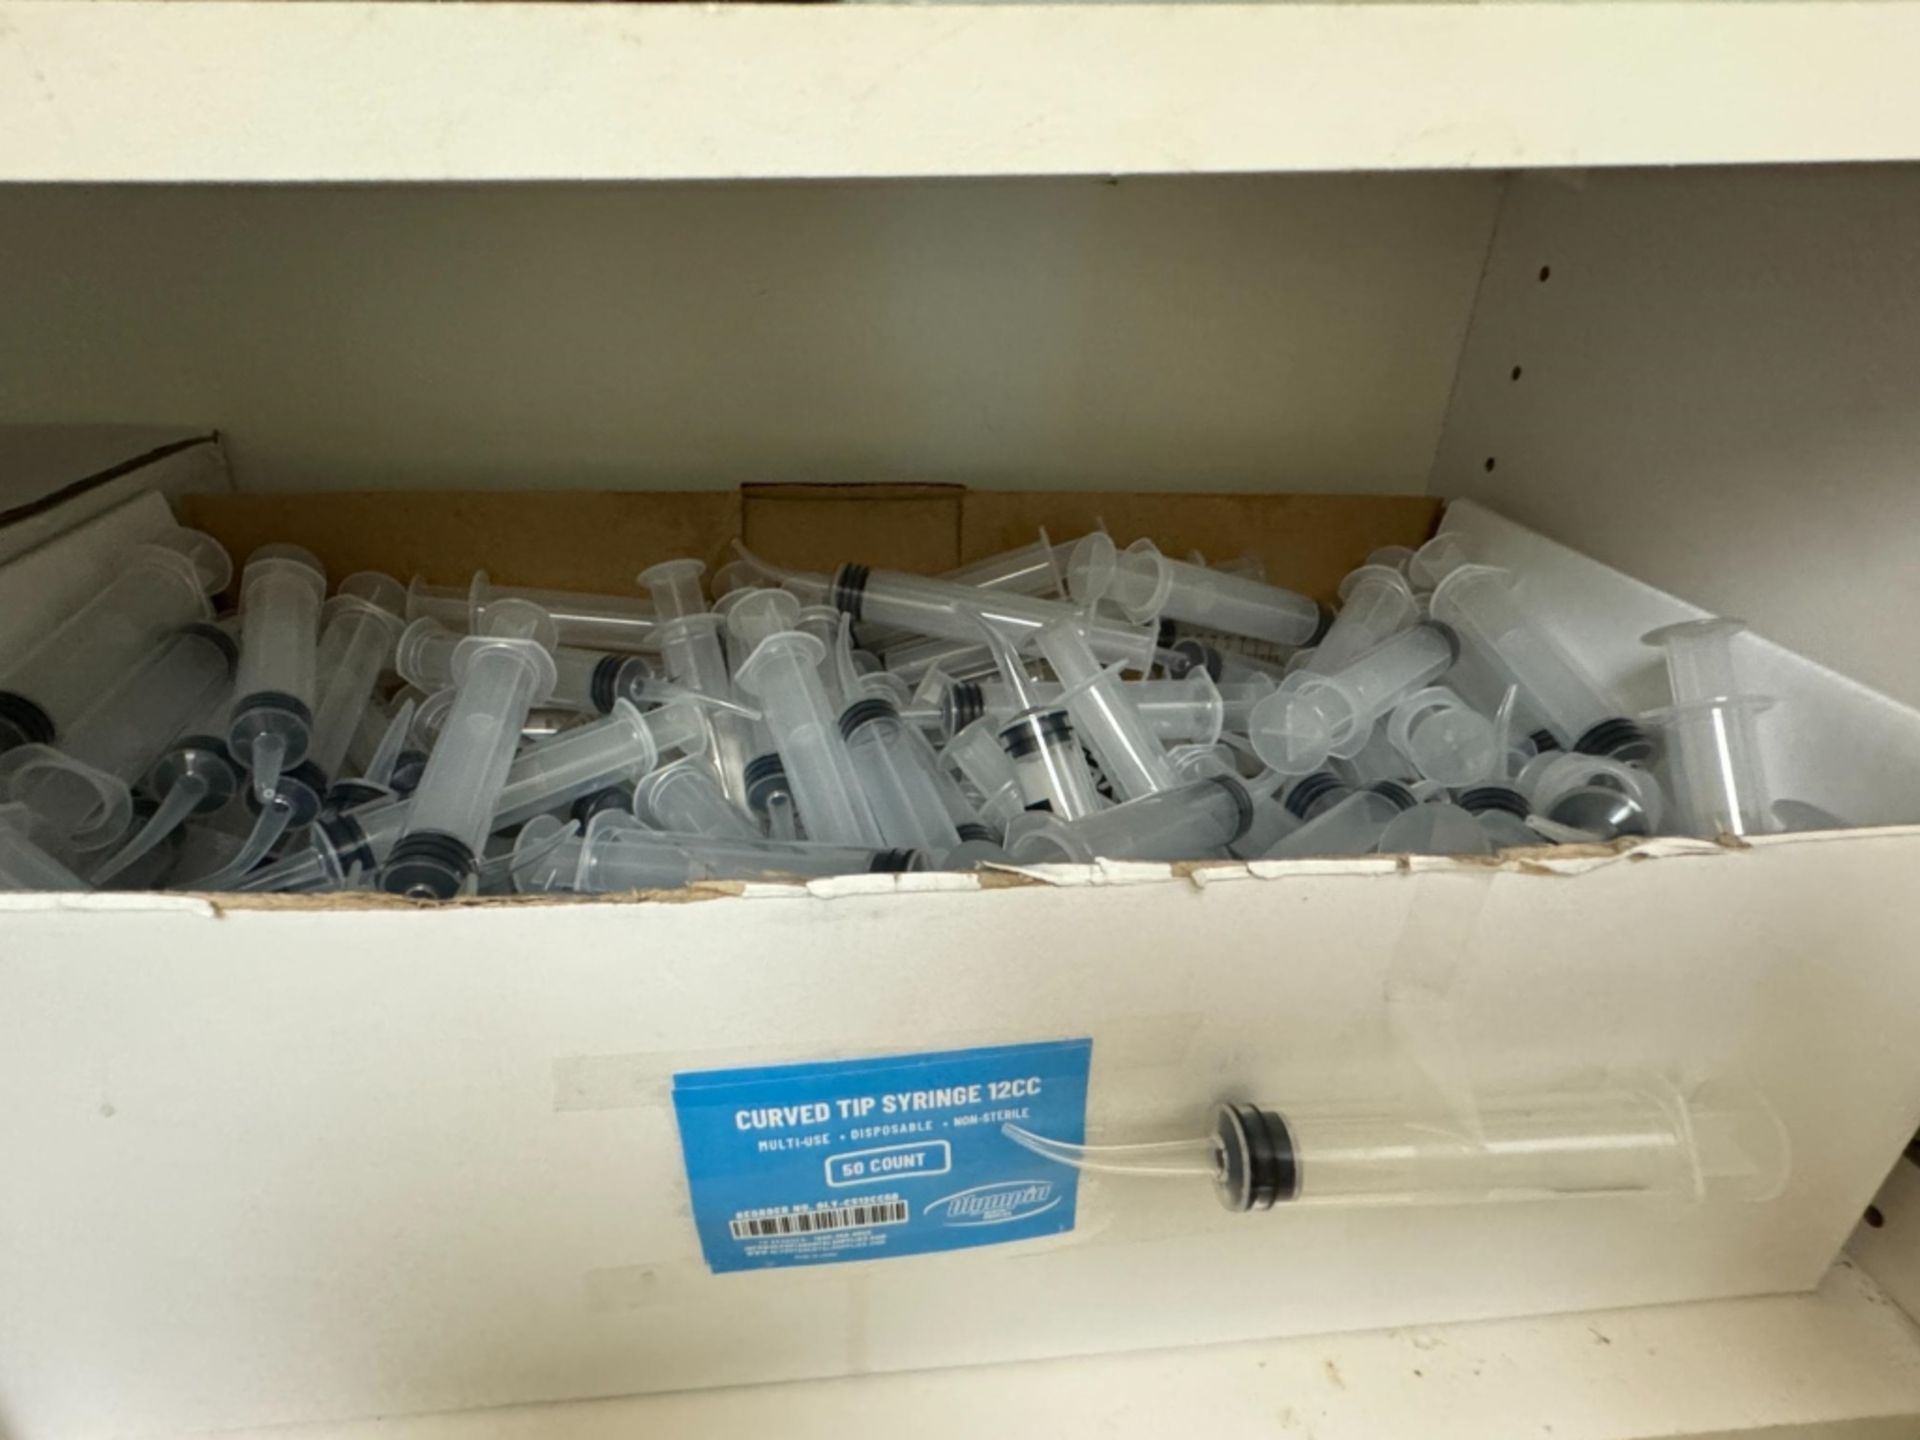 LOT CONSISTING OF DENTAL SUPPLIES IN CABINET - Image 6 of 15